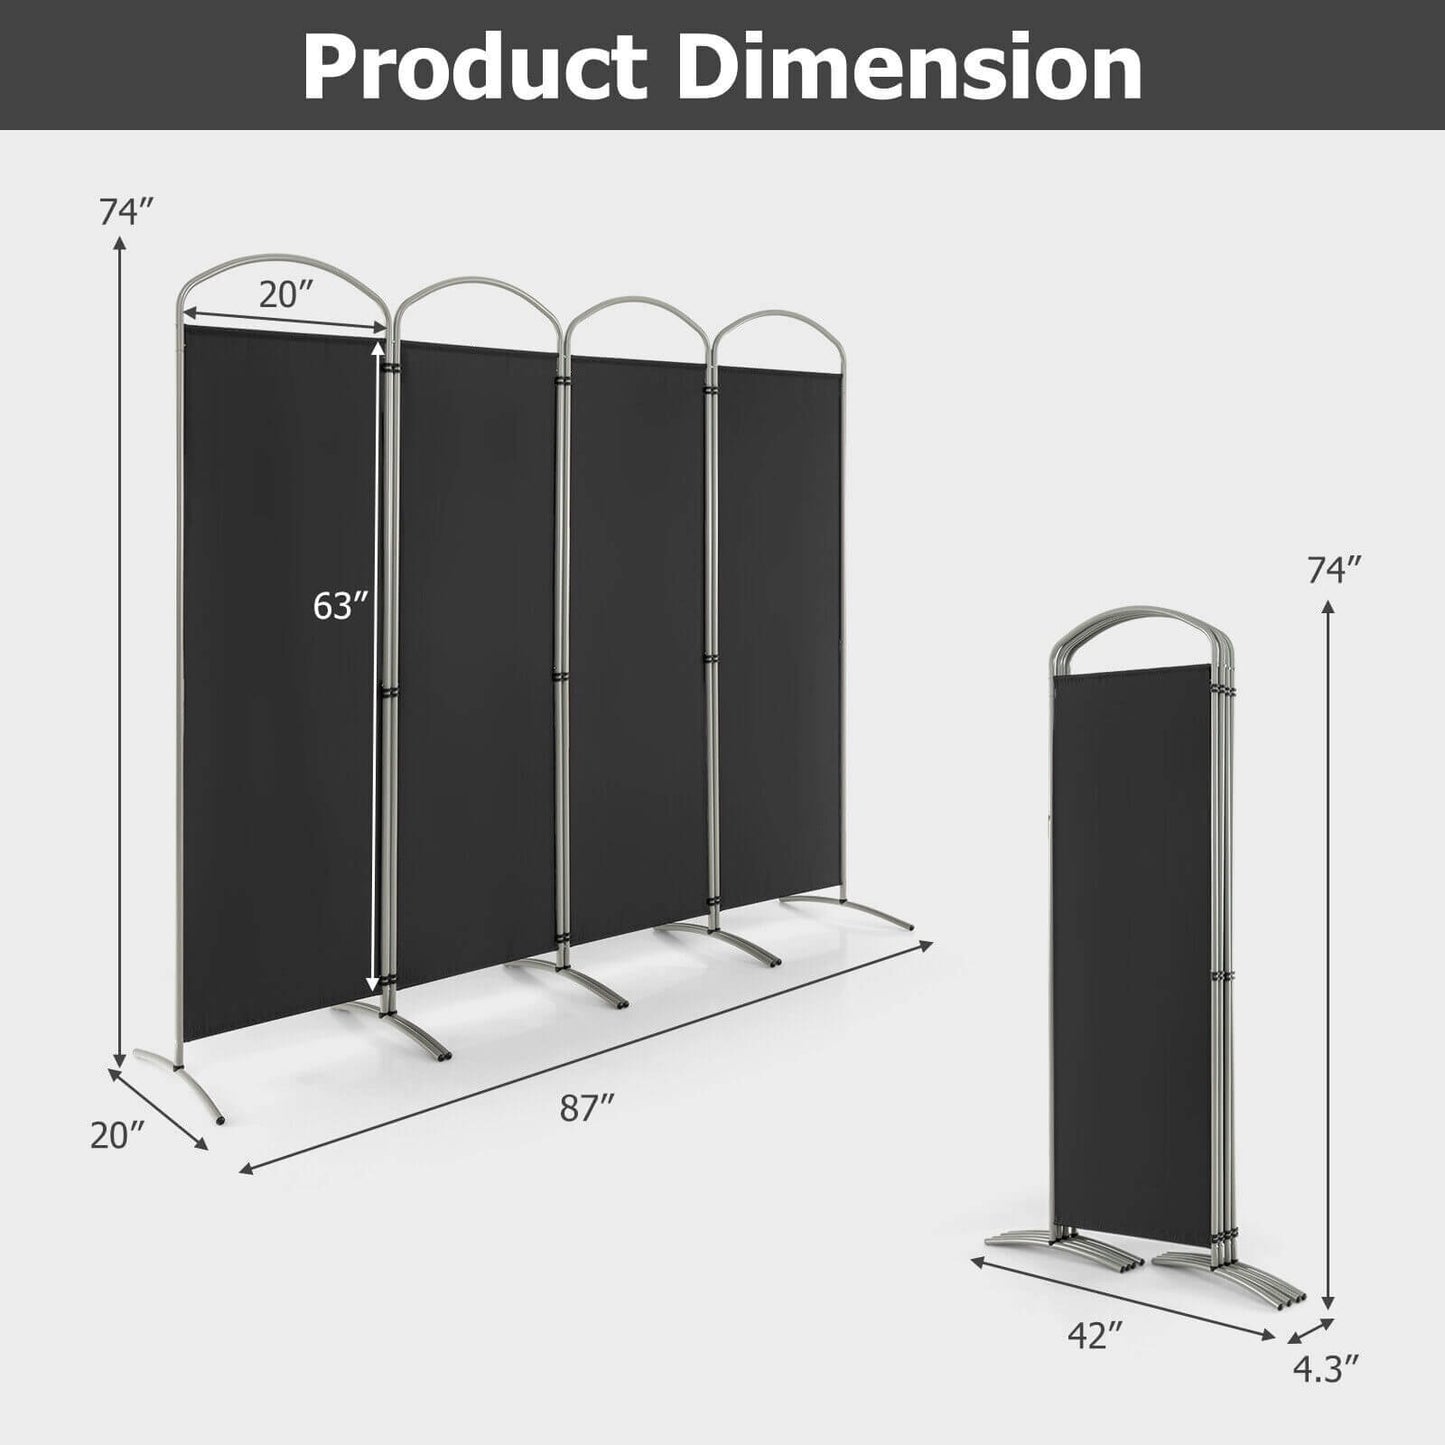 6.2Ft Folding 4-Panel Room Divider for Home Office Living Room, Black - Gallery Canada